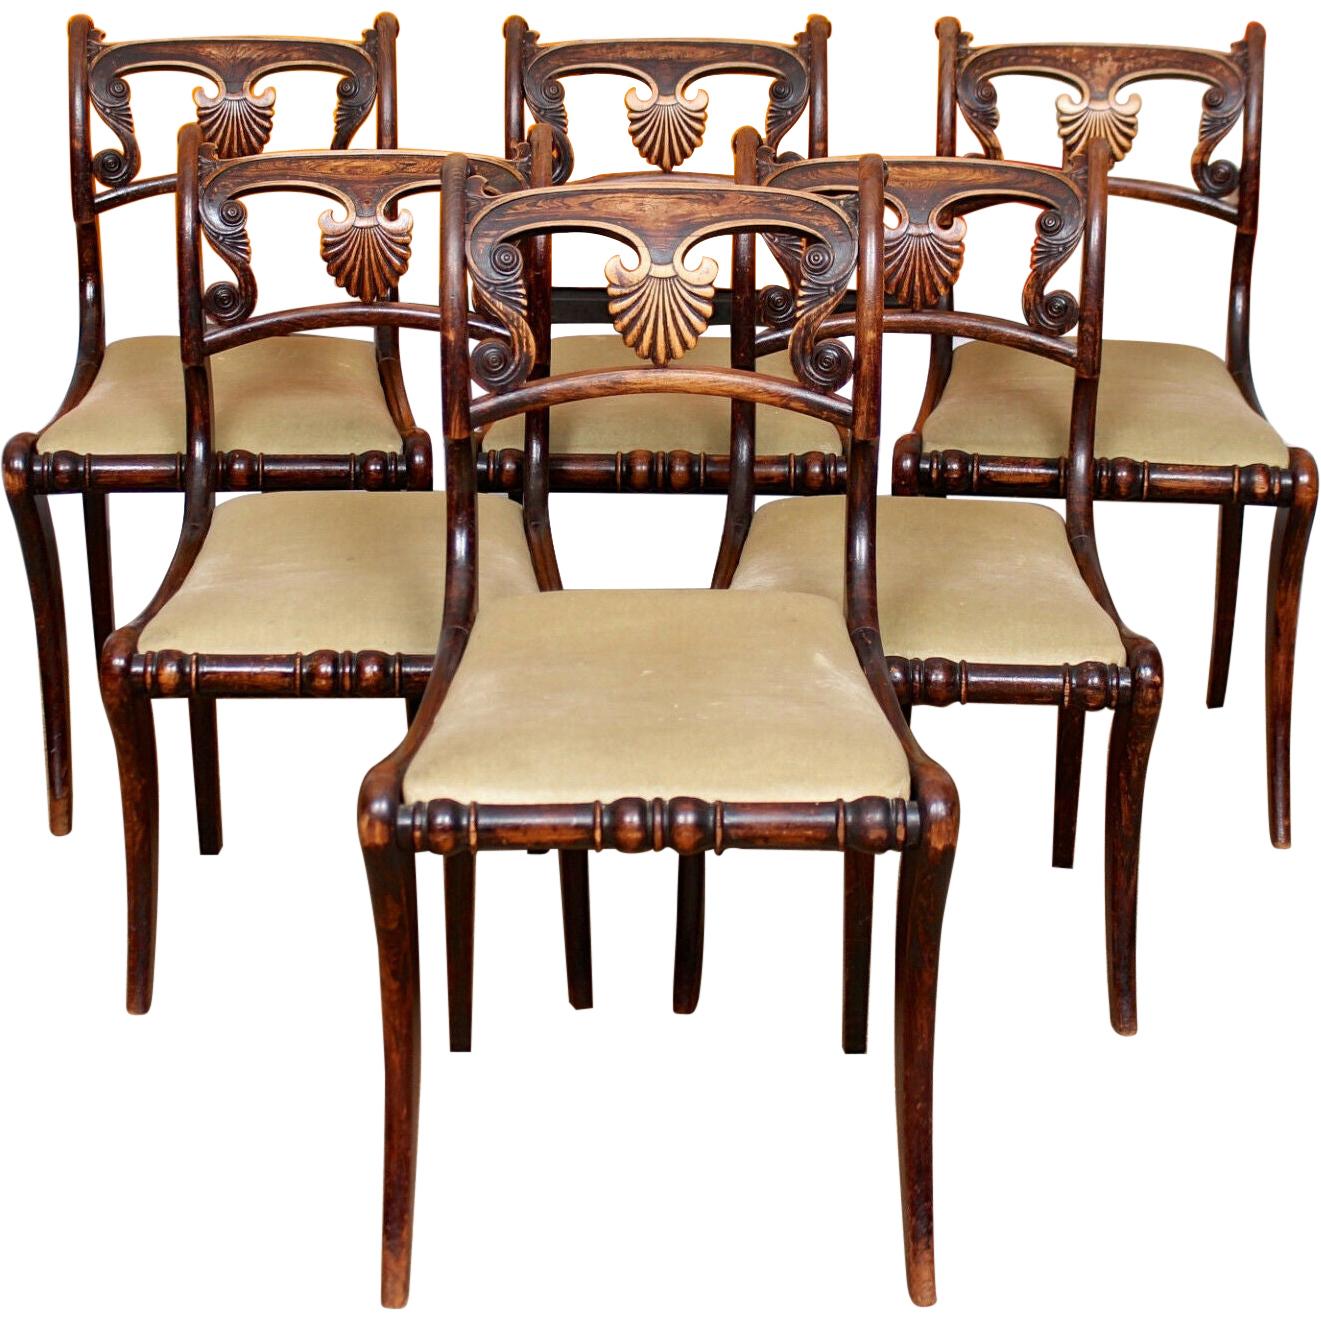 6 Regency Dining Chairs Harlequin Painted Rosewood Carved For Sale